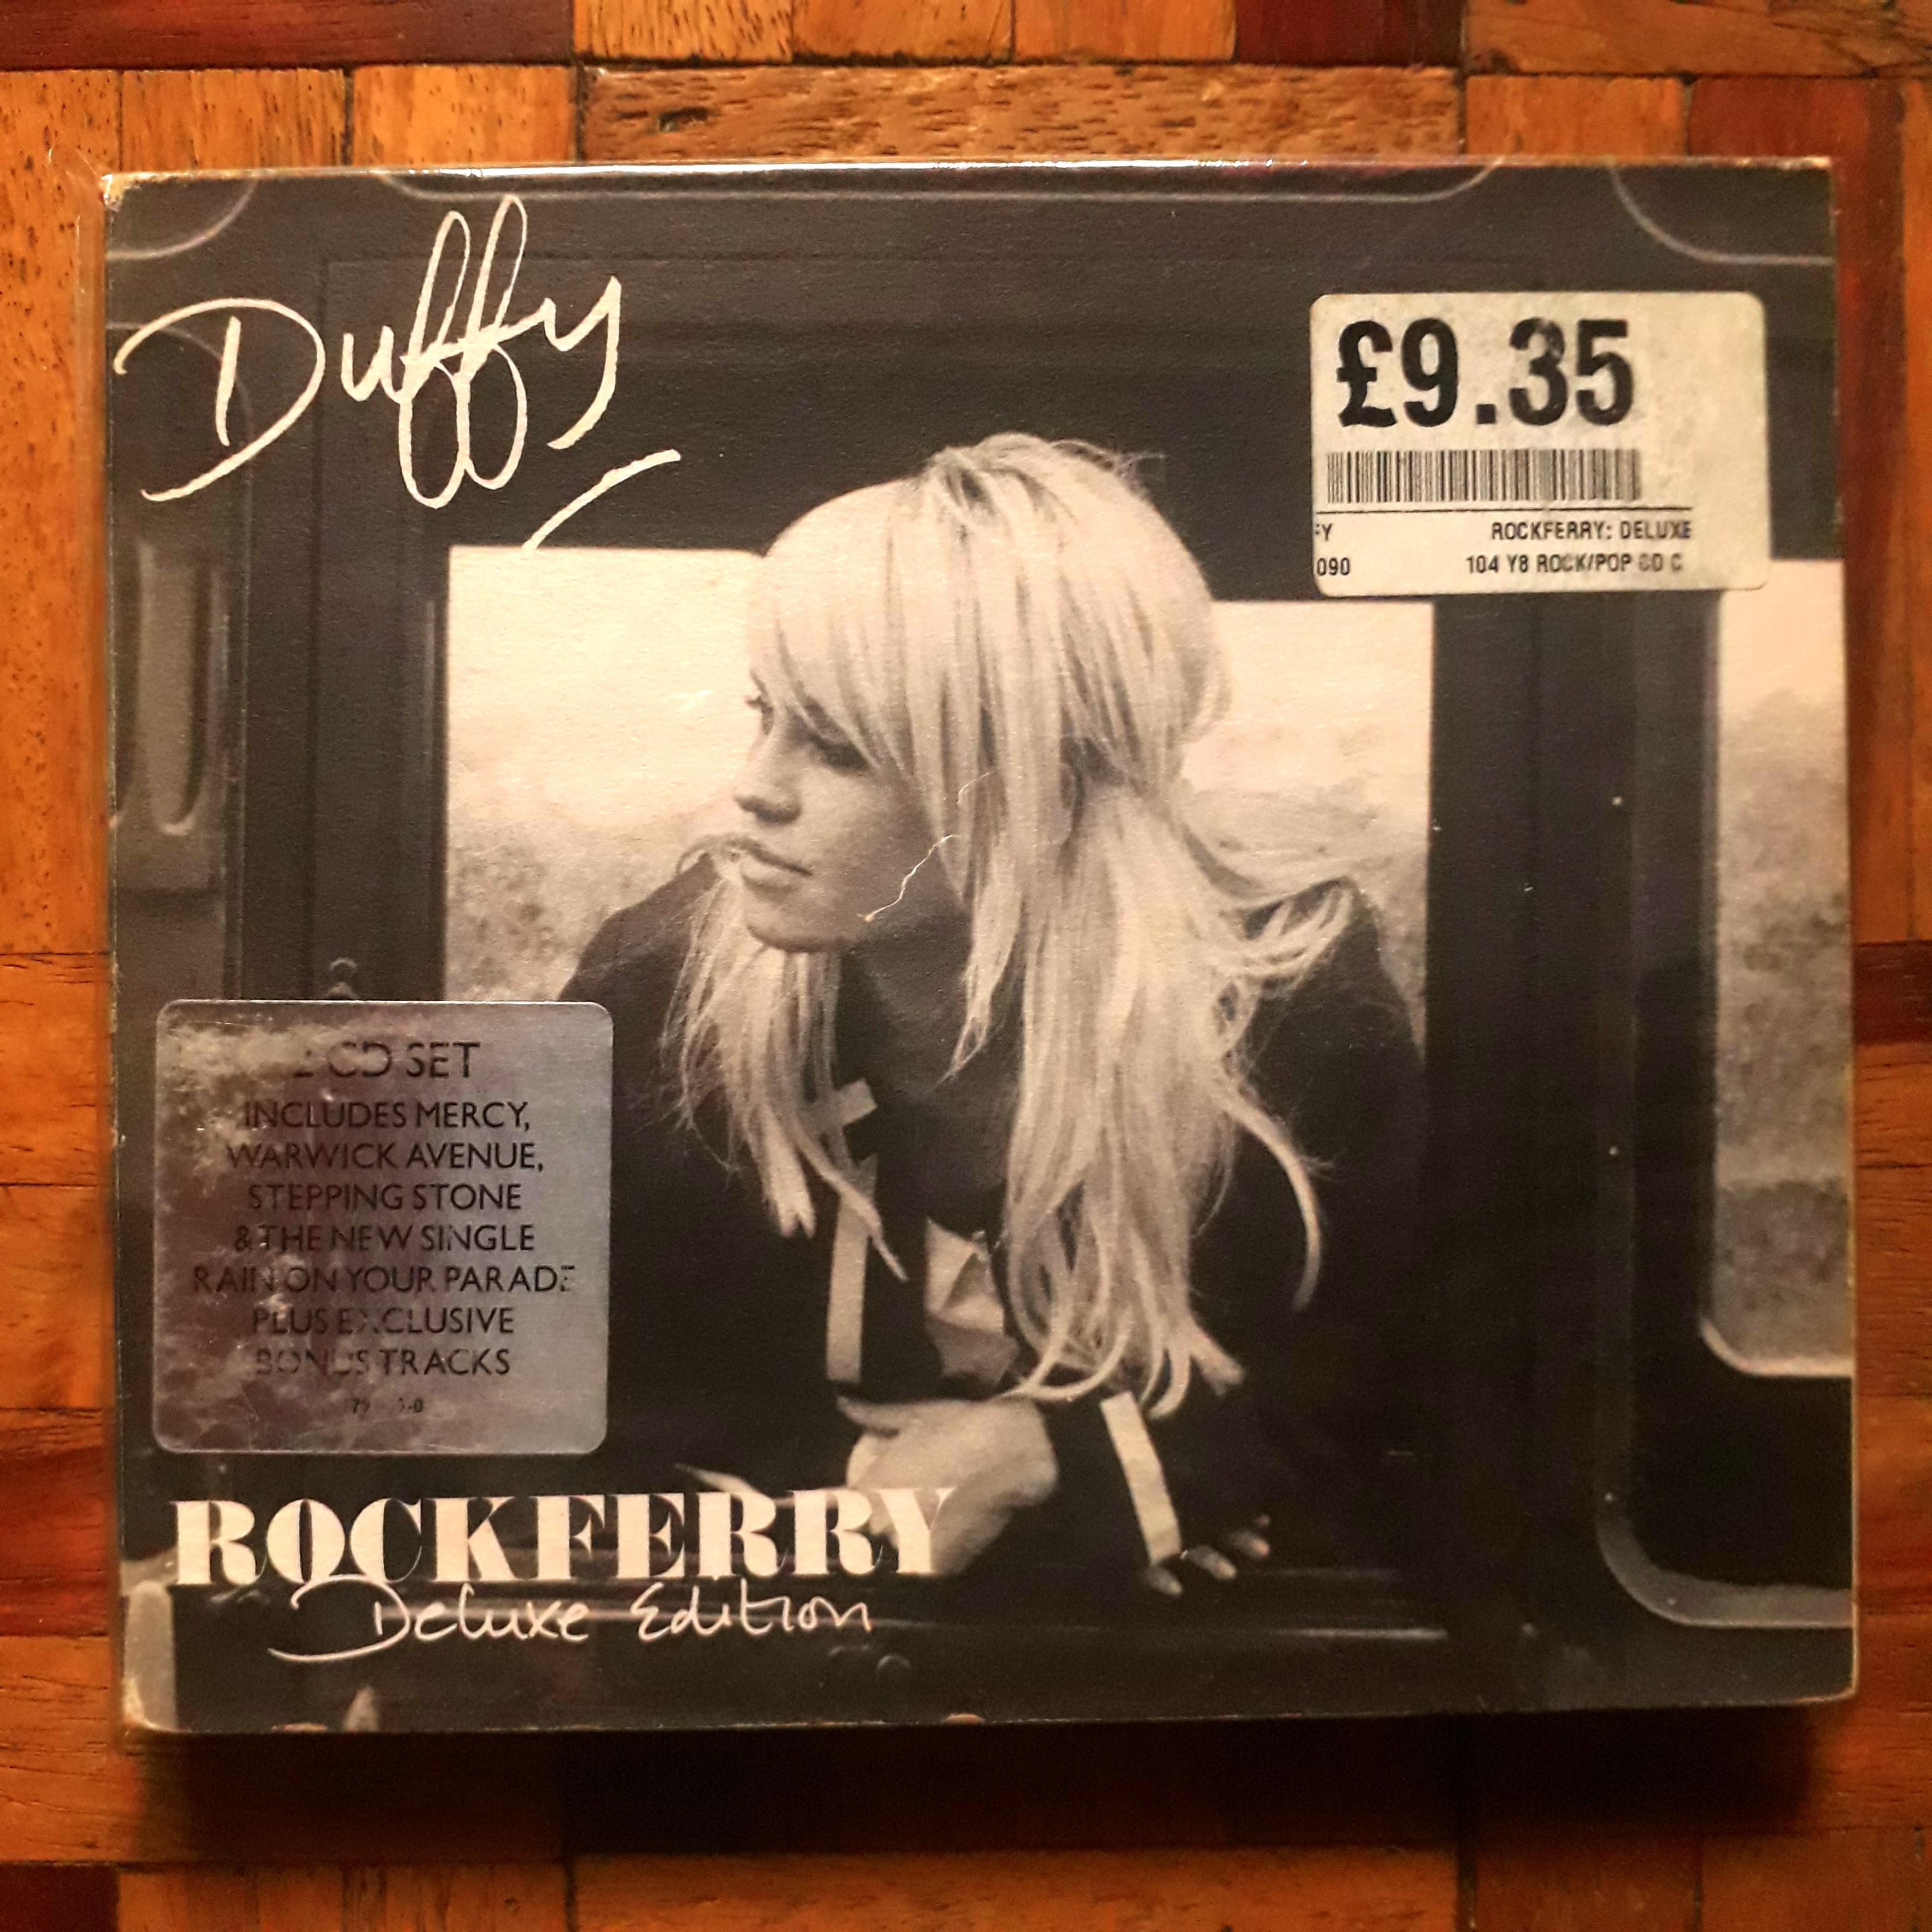 Duffy - Rockferry Deluxe Edition 2 CD Album, Hobbies & Toys, Music & Media, CDs & on Carousell